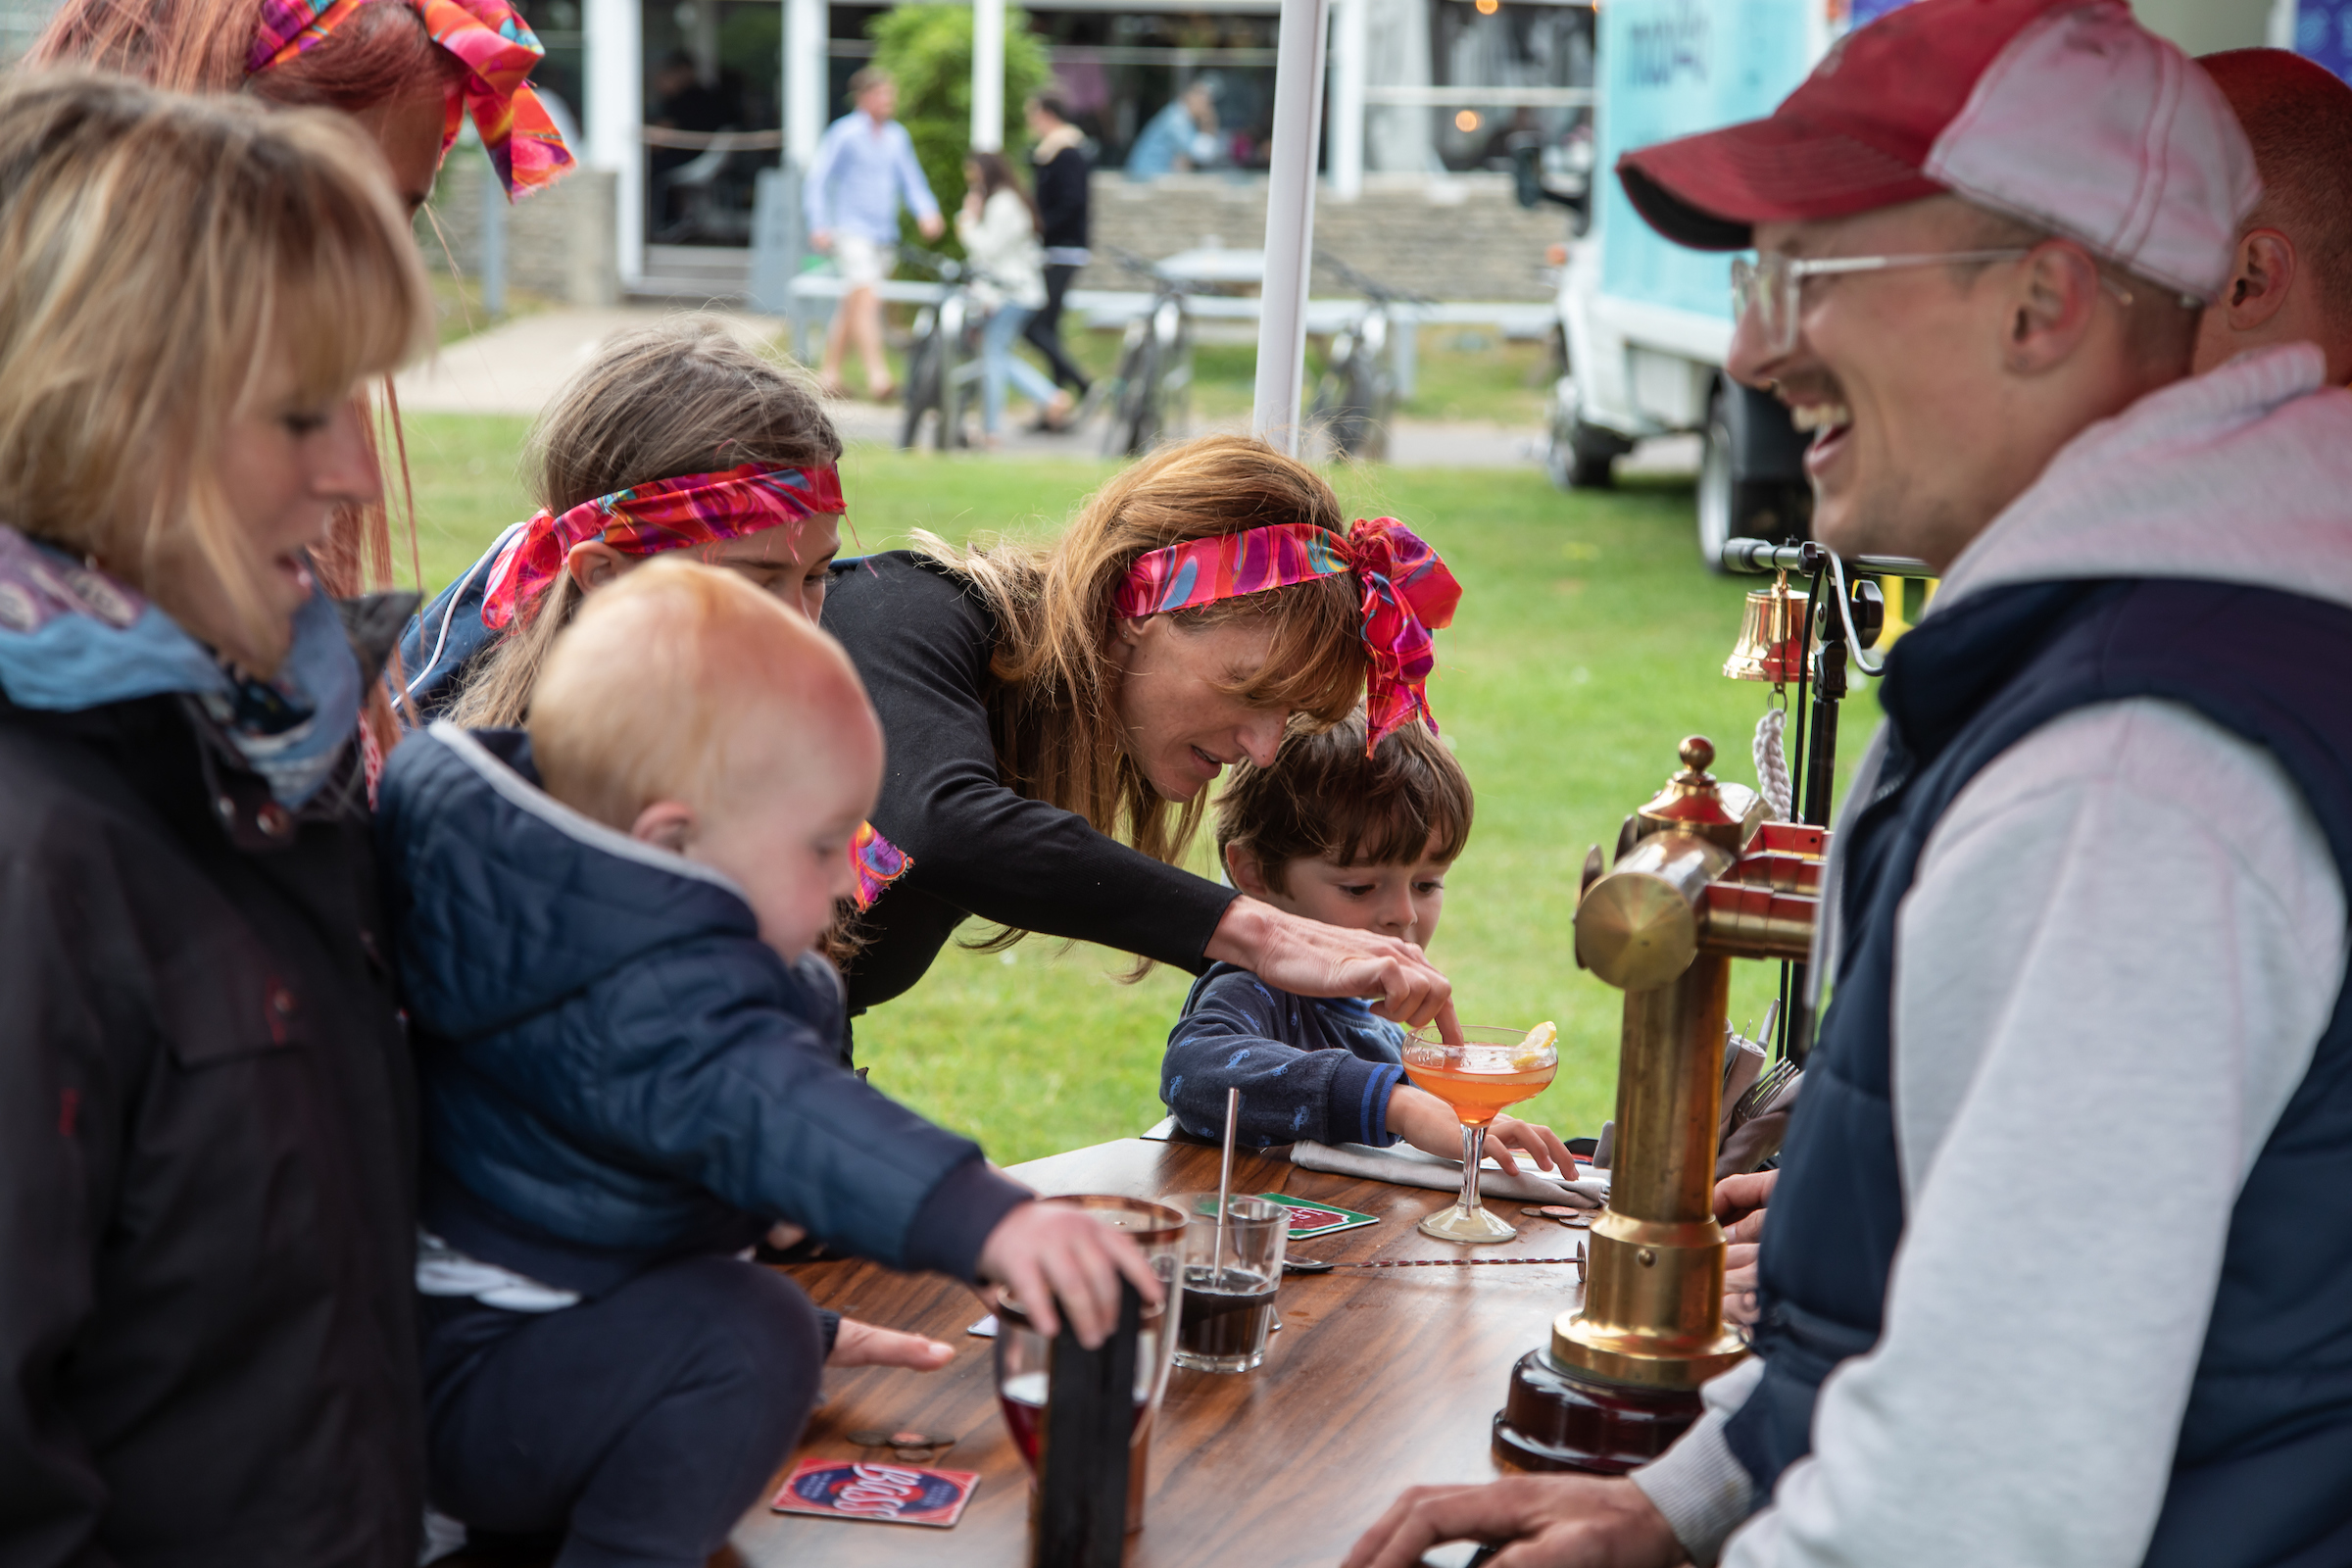 A group of people with small children all lean over the bar to try out the DJ-ing. One of the Working Boys is wearing a red and white cap with a grey hoodie and navy gilet. He is similing.